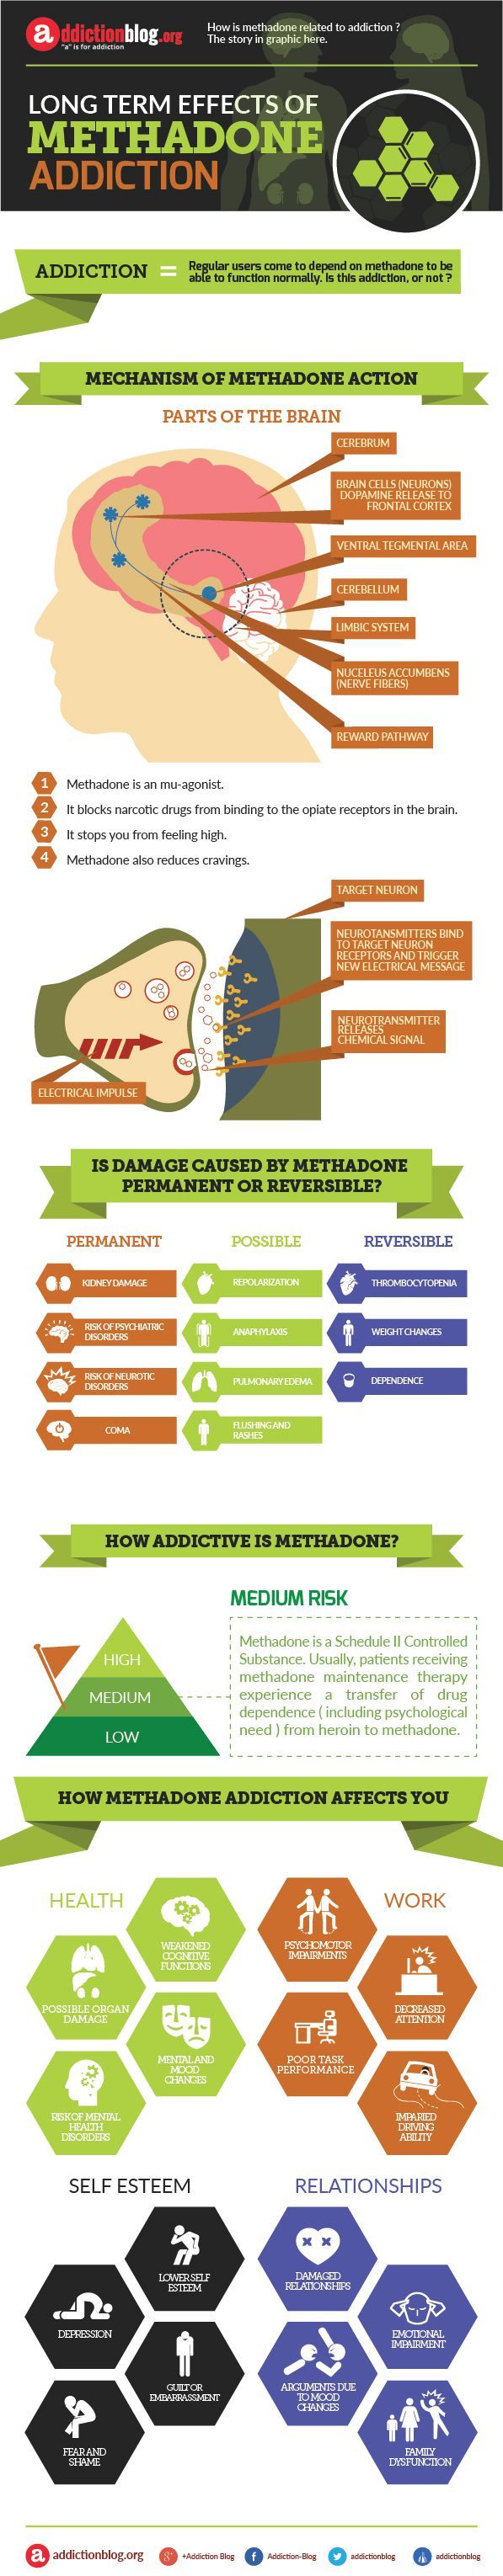 Psychology-Infographic-Long-term-effects-of-methadone-addiction-INFOGRAPHIC Psychology Infographic : Long term effects of methadone addiction (INFOGRAPHIC)